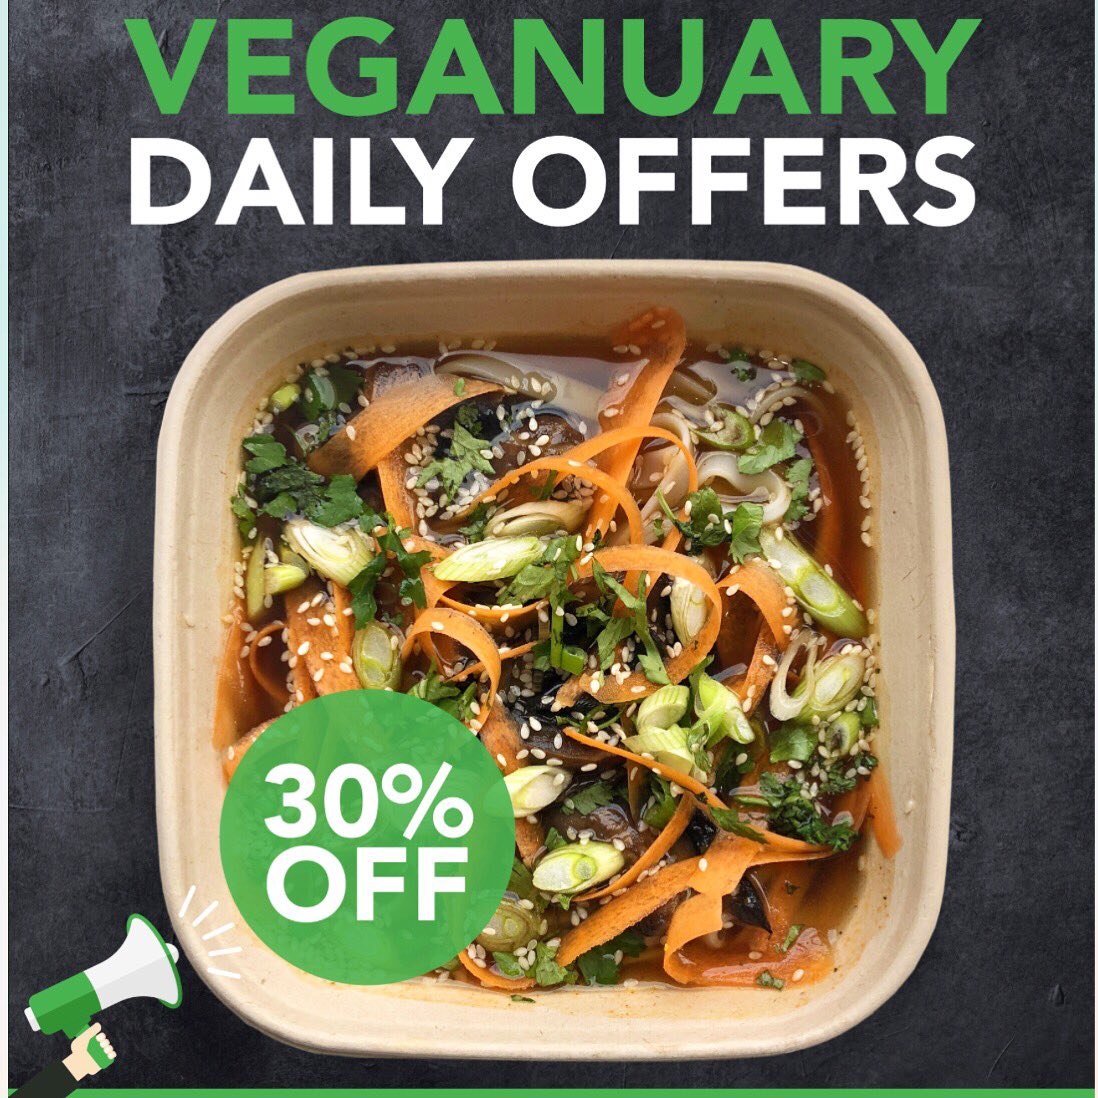 30% OFF 😀 throughout January a different vegan offer each day! See in store details! 💚 let your fellow vegans know get tagging! #veganuary #vegan #newcastle #thenakeddeli #nakeddeli #fit #fitfood #fitfam #fitspo #fitspiration #foodstagram #foodie #healthyeats #healthylifestyle